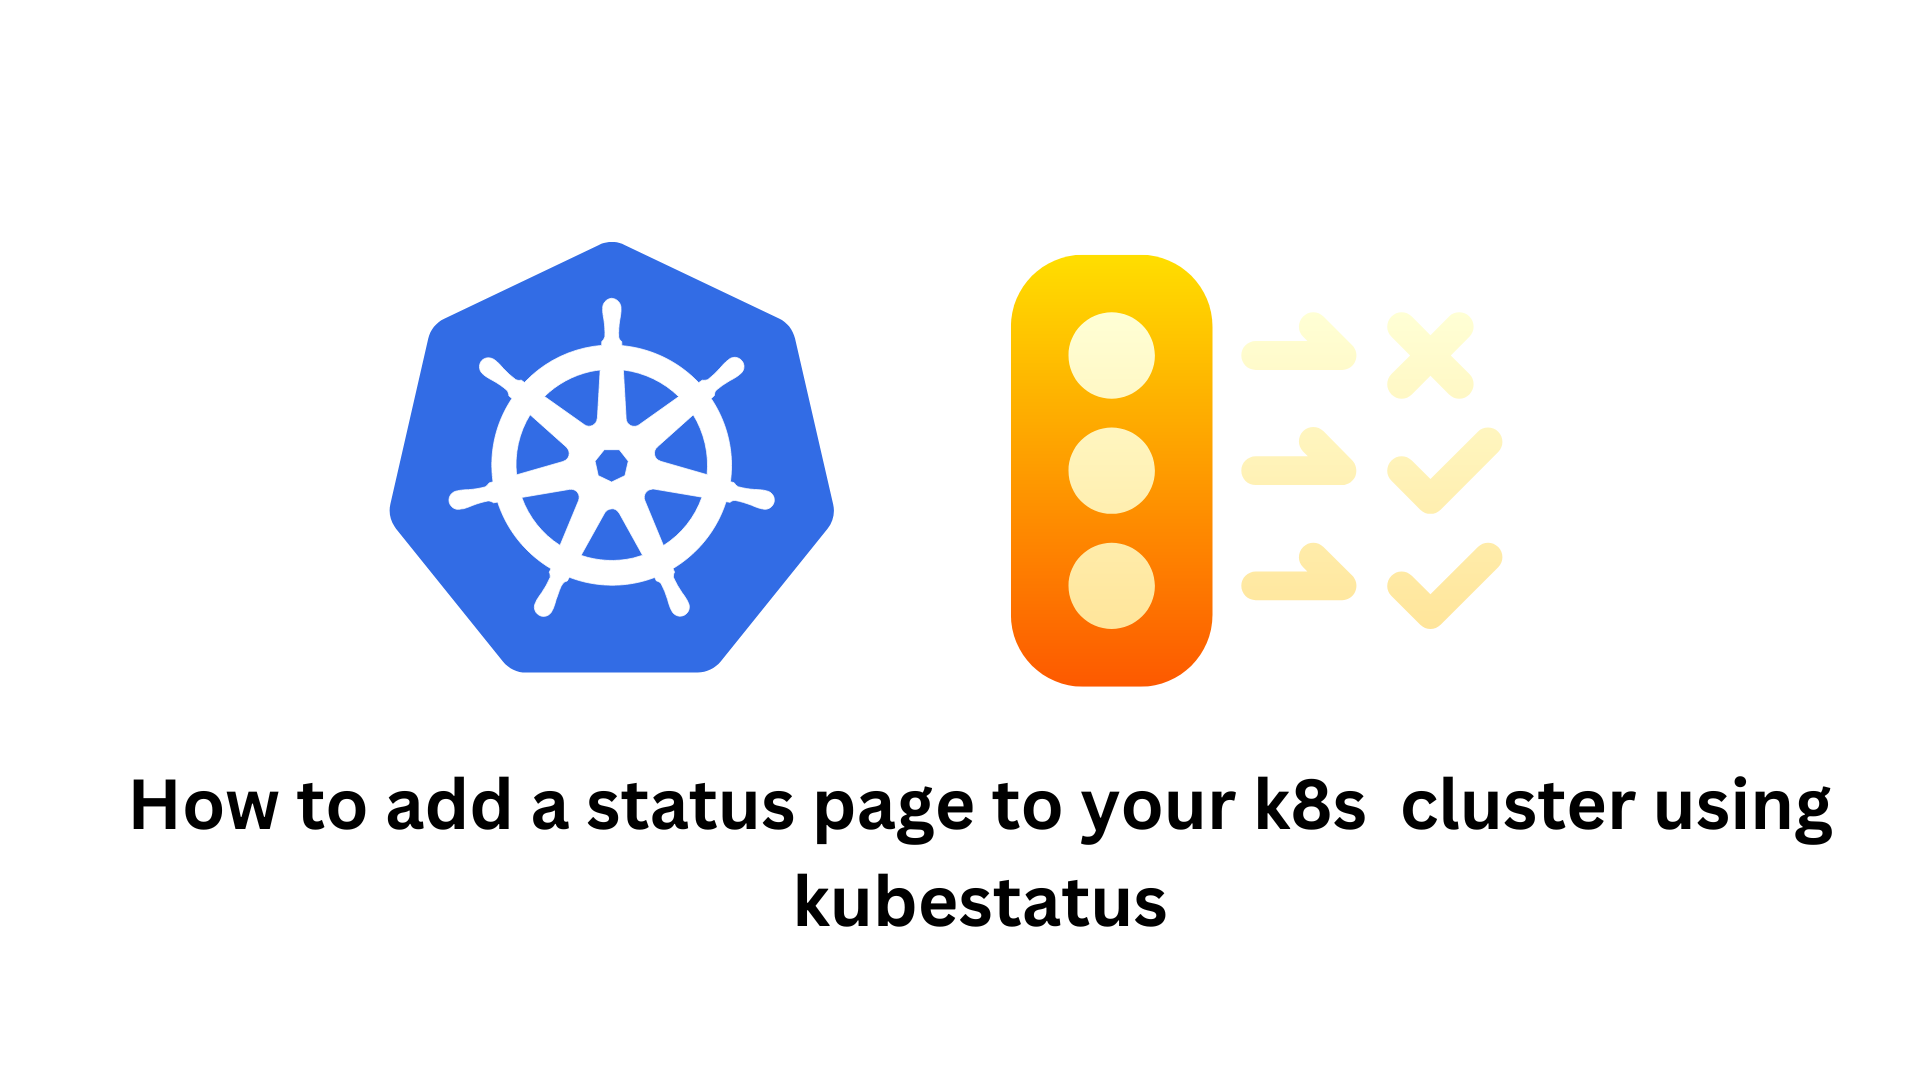 How to add status page to your k8s cluster using kubestatus